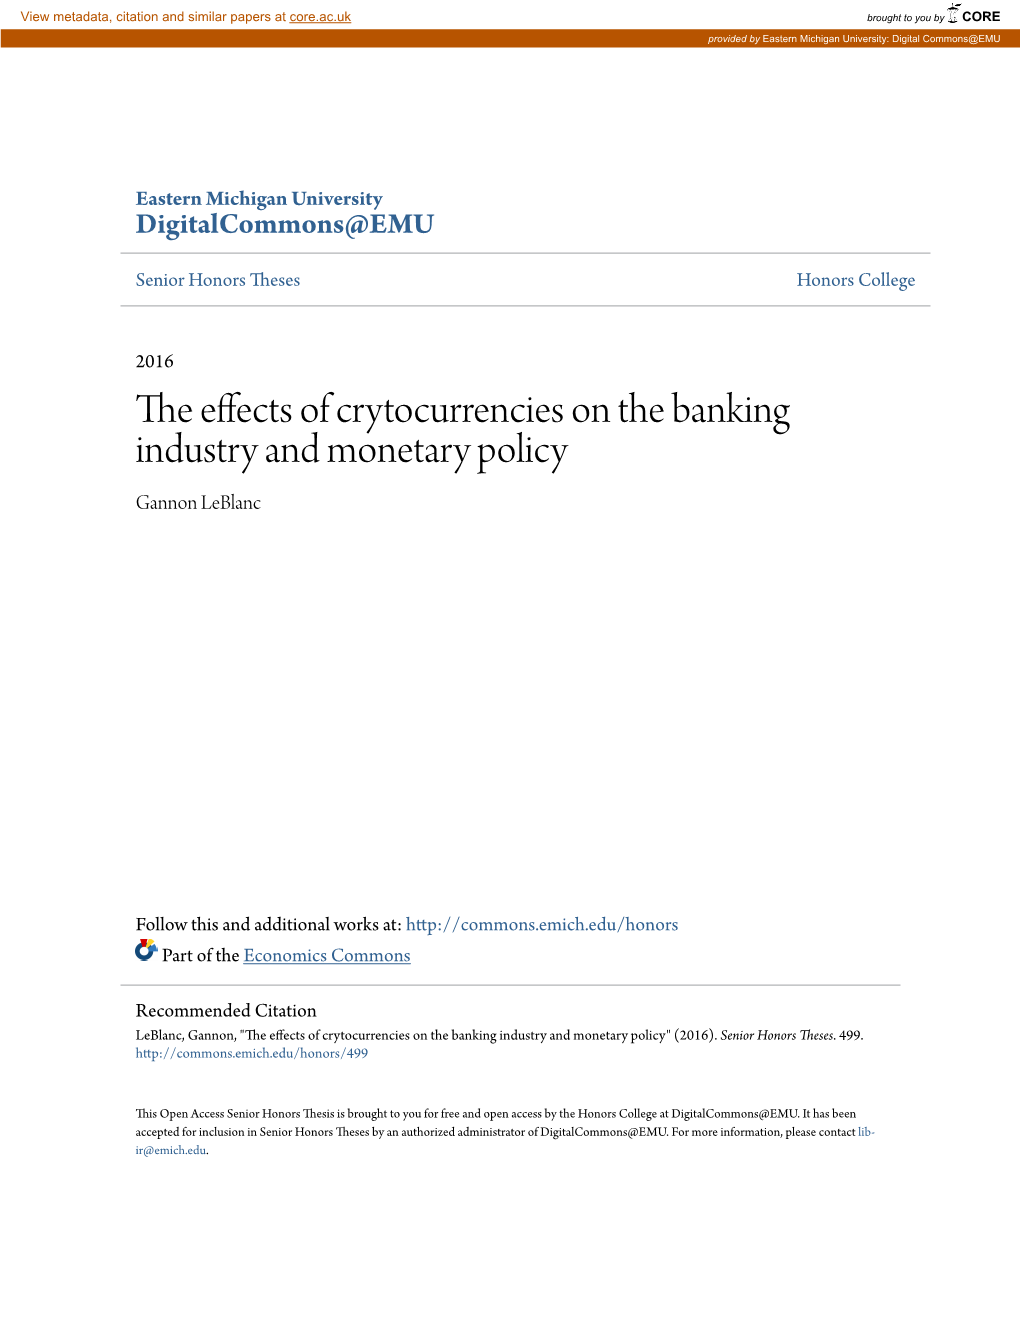 The Effects of Crytocurrencies on the Banking Industry and Monetary Policy Gannon Leblanc